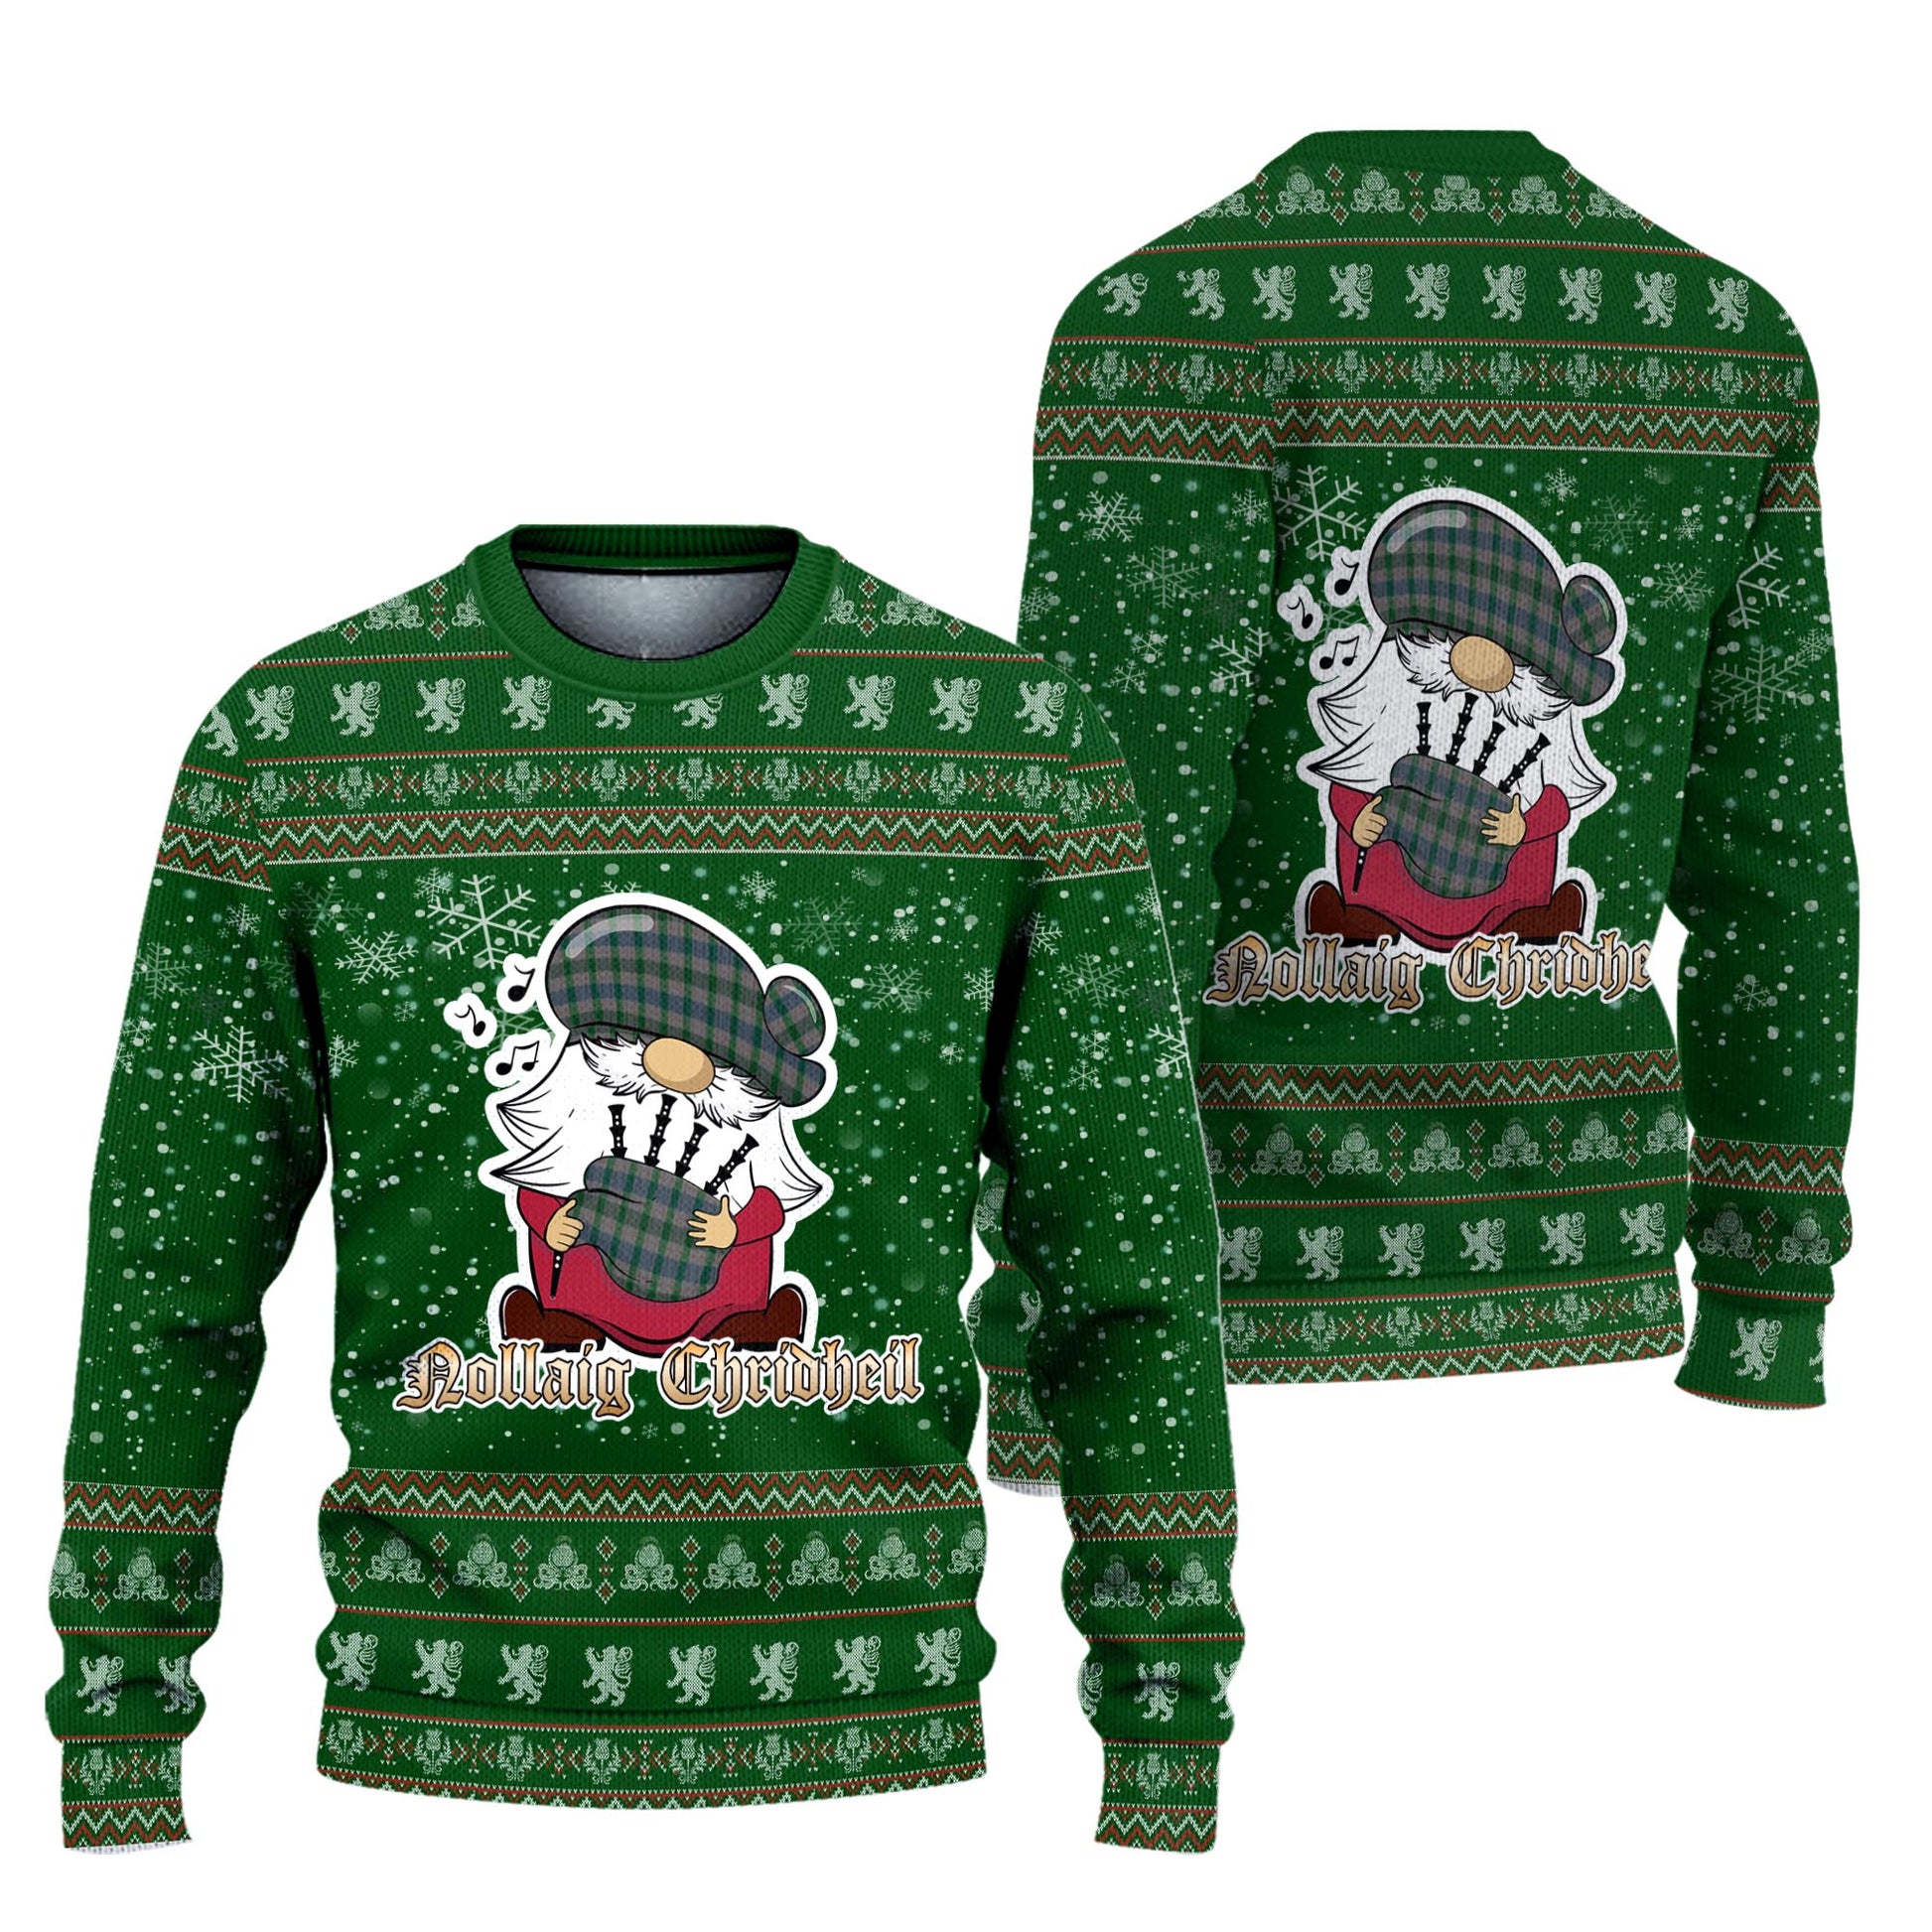 Lloyd of Wales Clan Christmas Family Knitted Sweater with Funny Gnome Playing Bagpipes Unisex Green - Tartanvibesclothing